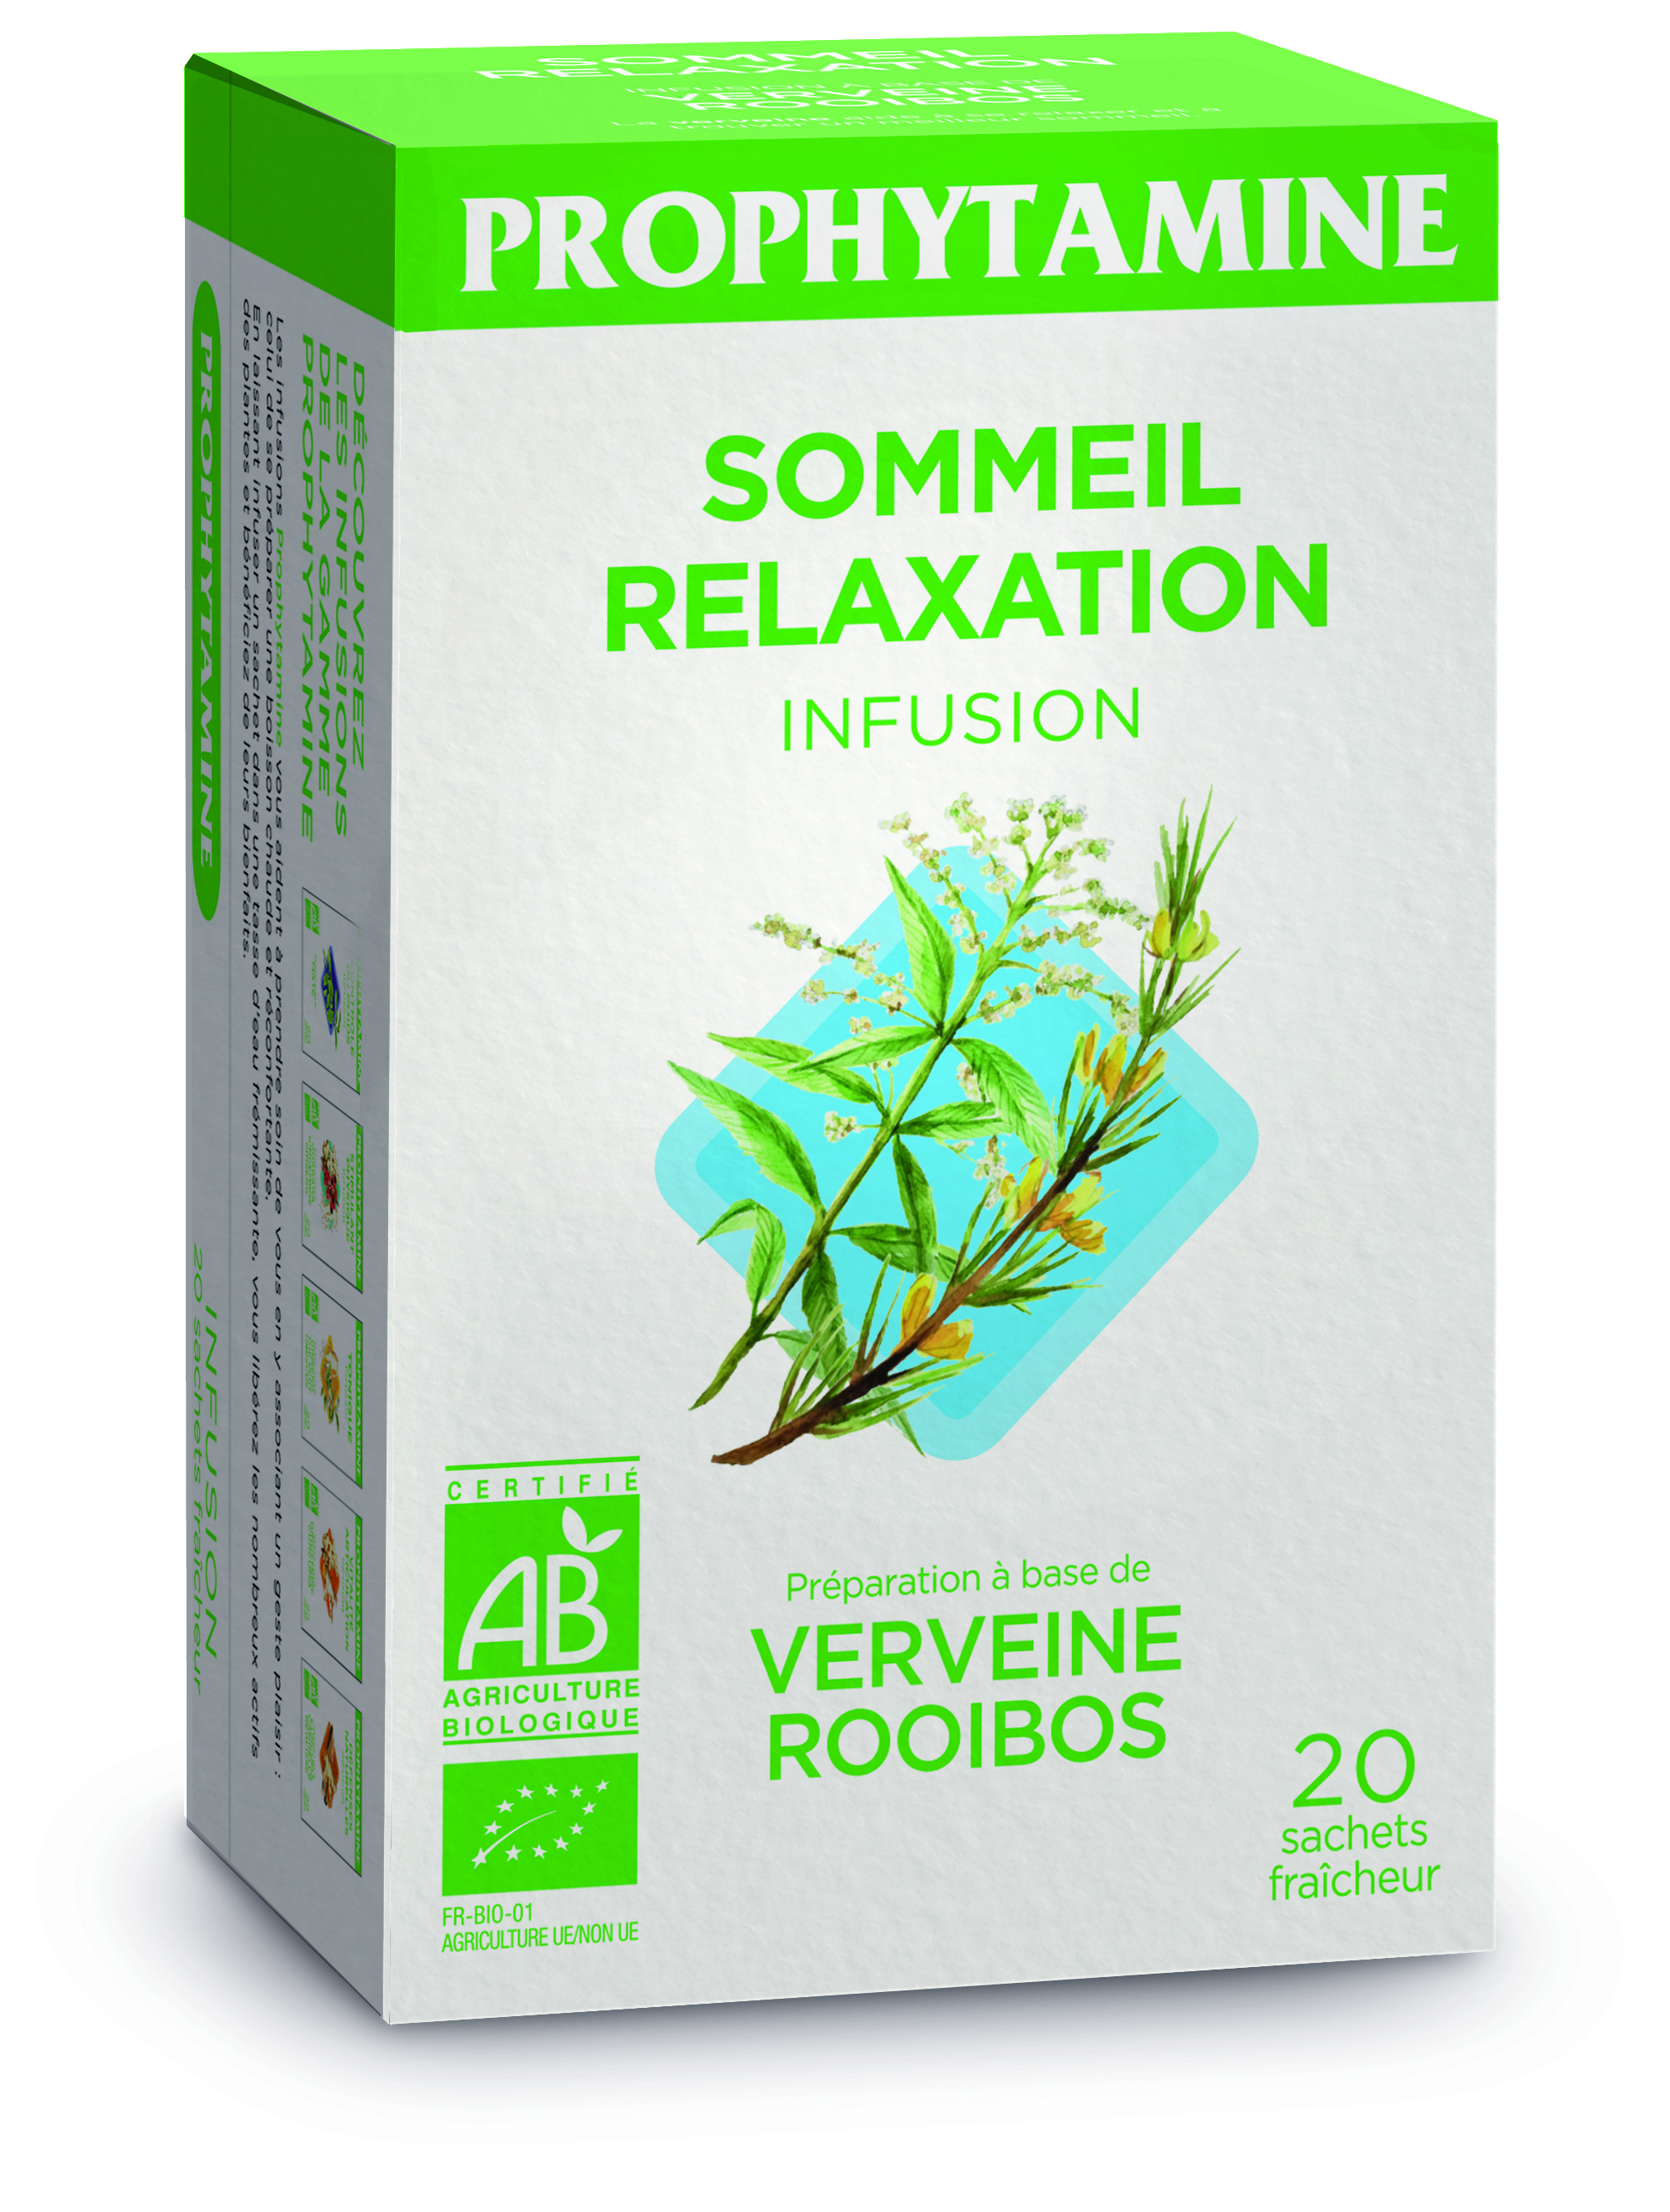 Infusion Sommeil Relaxation Bio (12 X 20 Sach) - PROPHYTAMINE